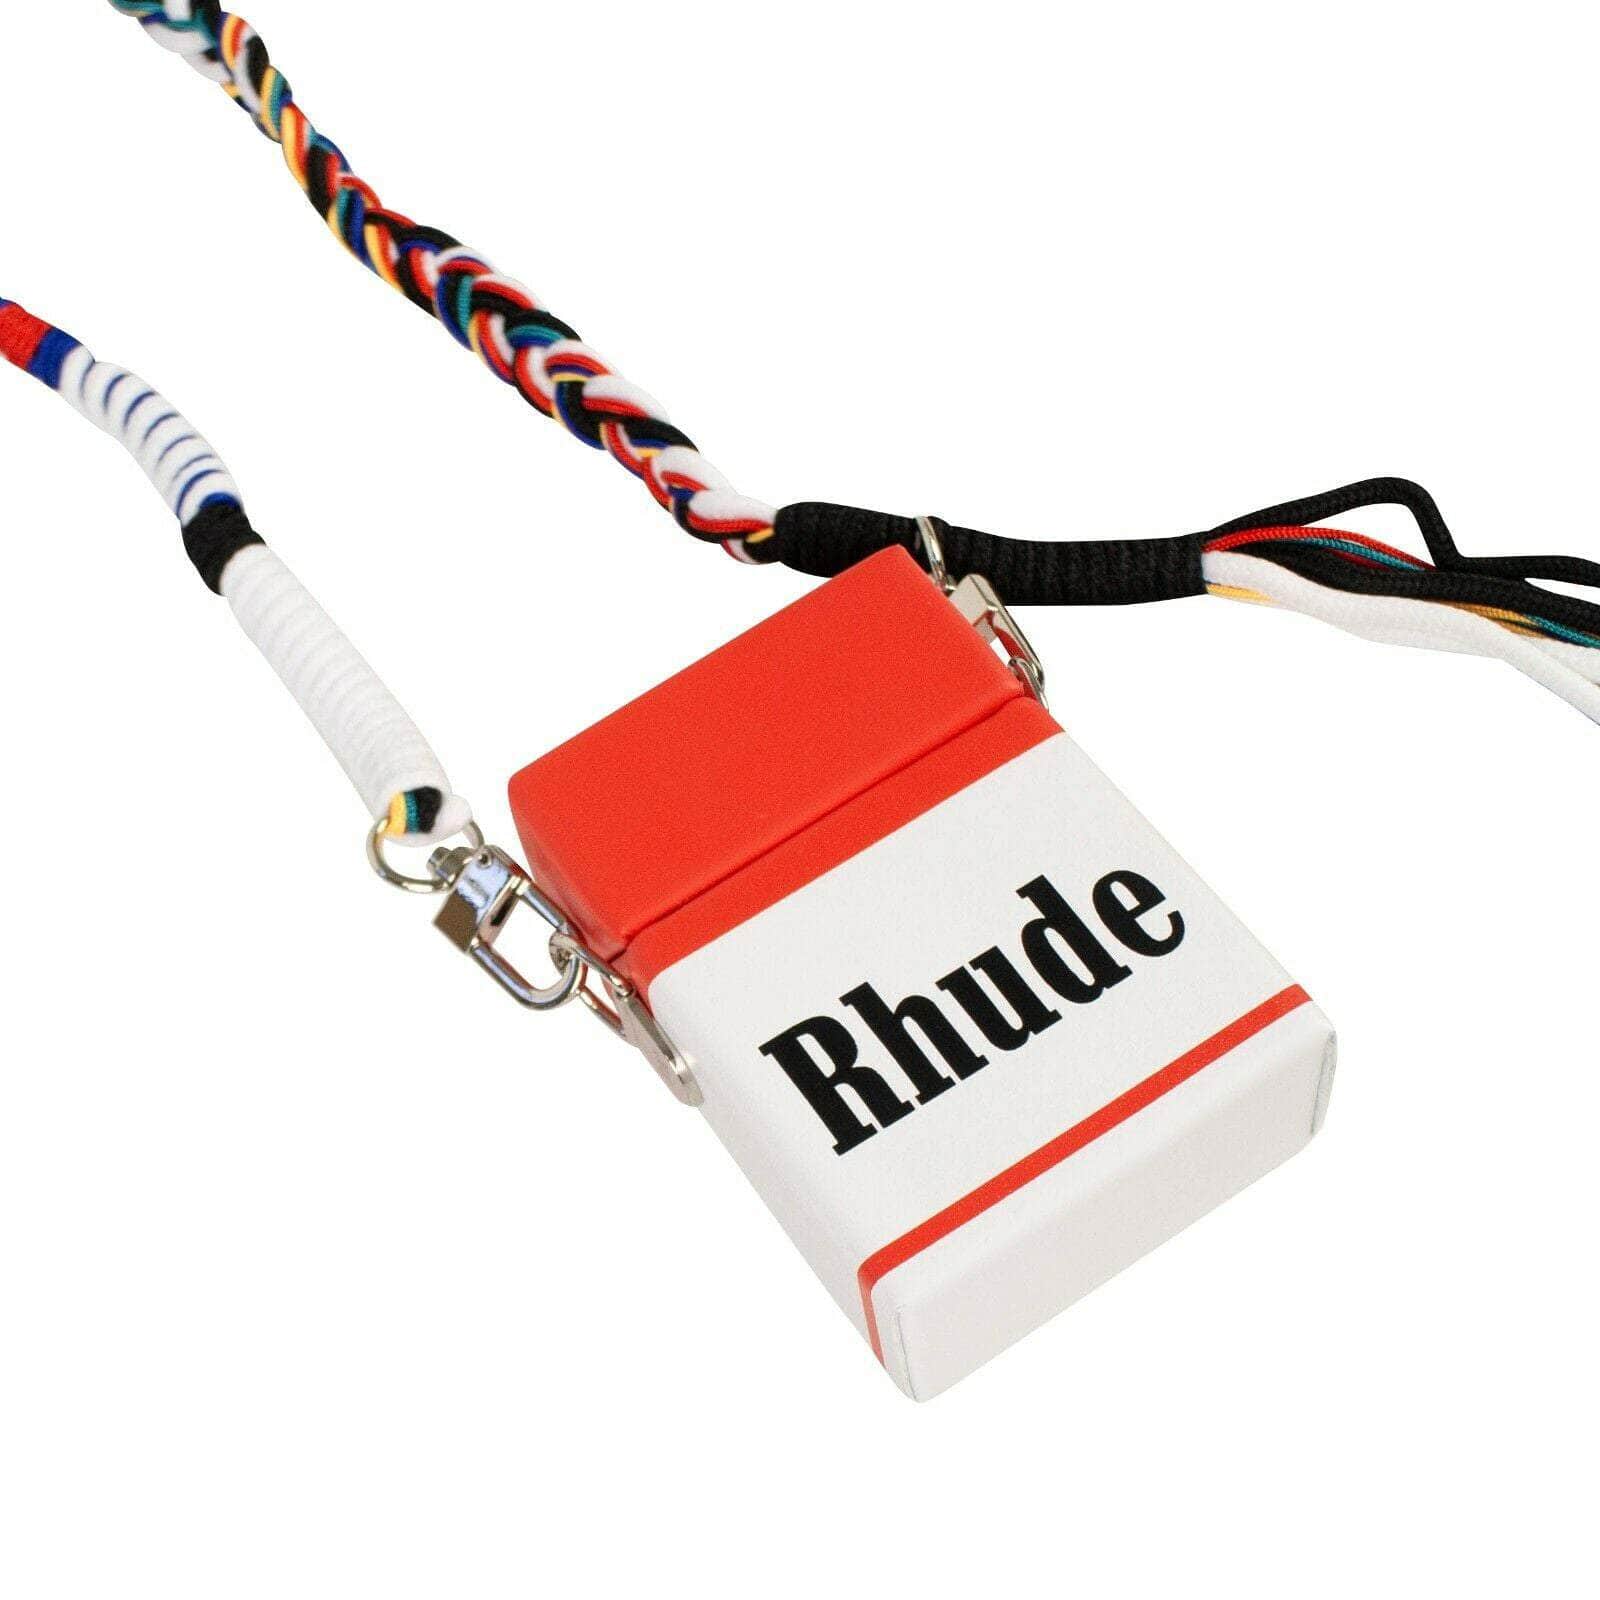 Rhude 500-750, channelenable-all, chicmi, couponcollection, gender-mens, main-handbags, mens-messenger-bags, mens-shoes, rhude, size-os OS Red And White Small Cigarette Box Crossbody Bag 95-RHD-3011/OS 95-RHD-3011/OS